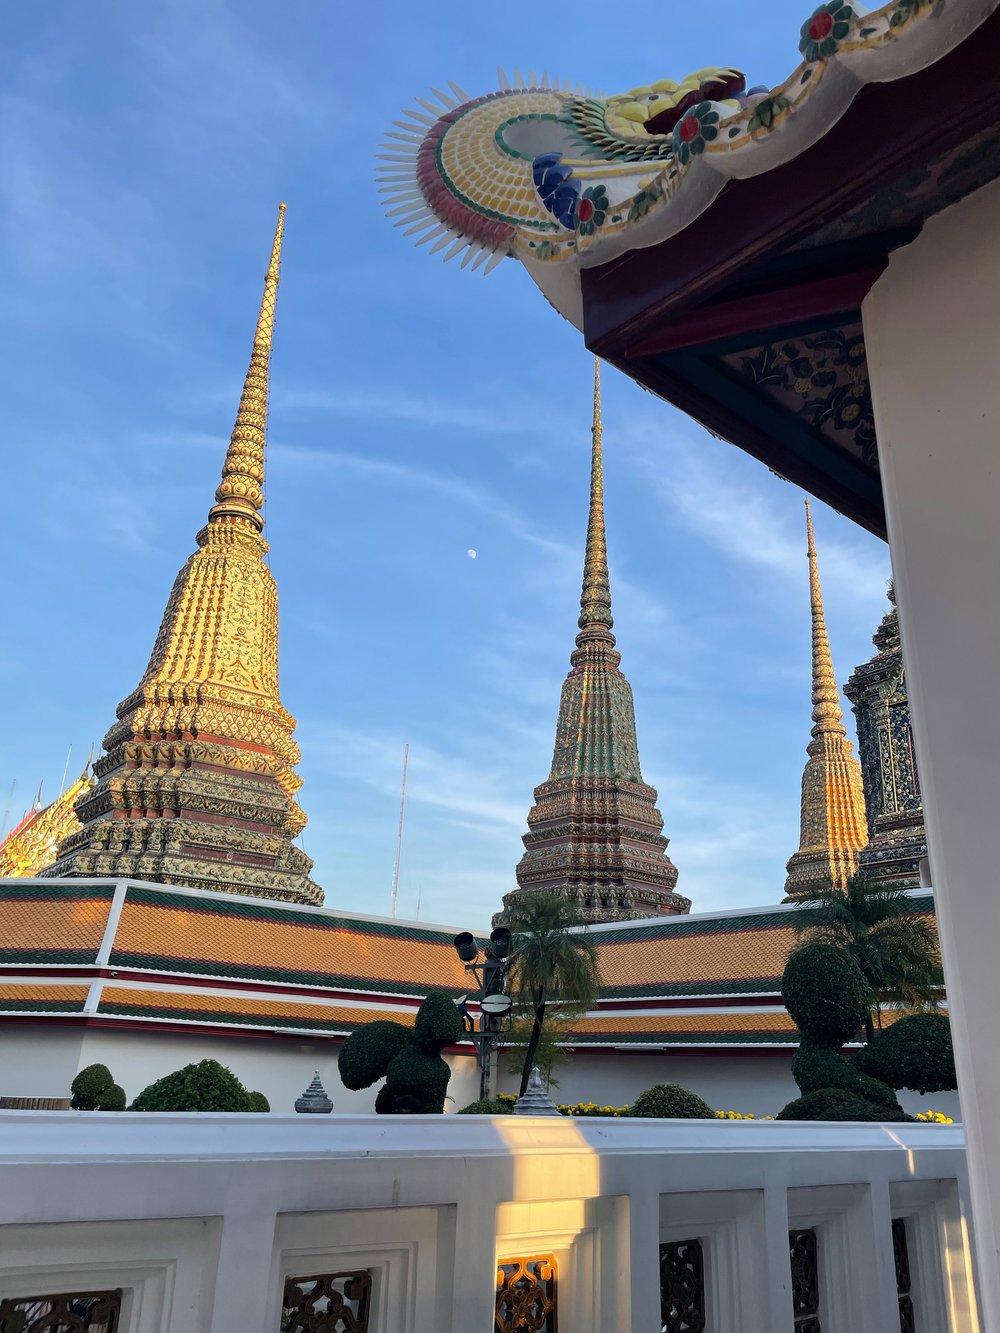 Finding my view at Wat Pho temple